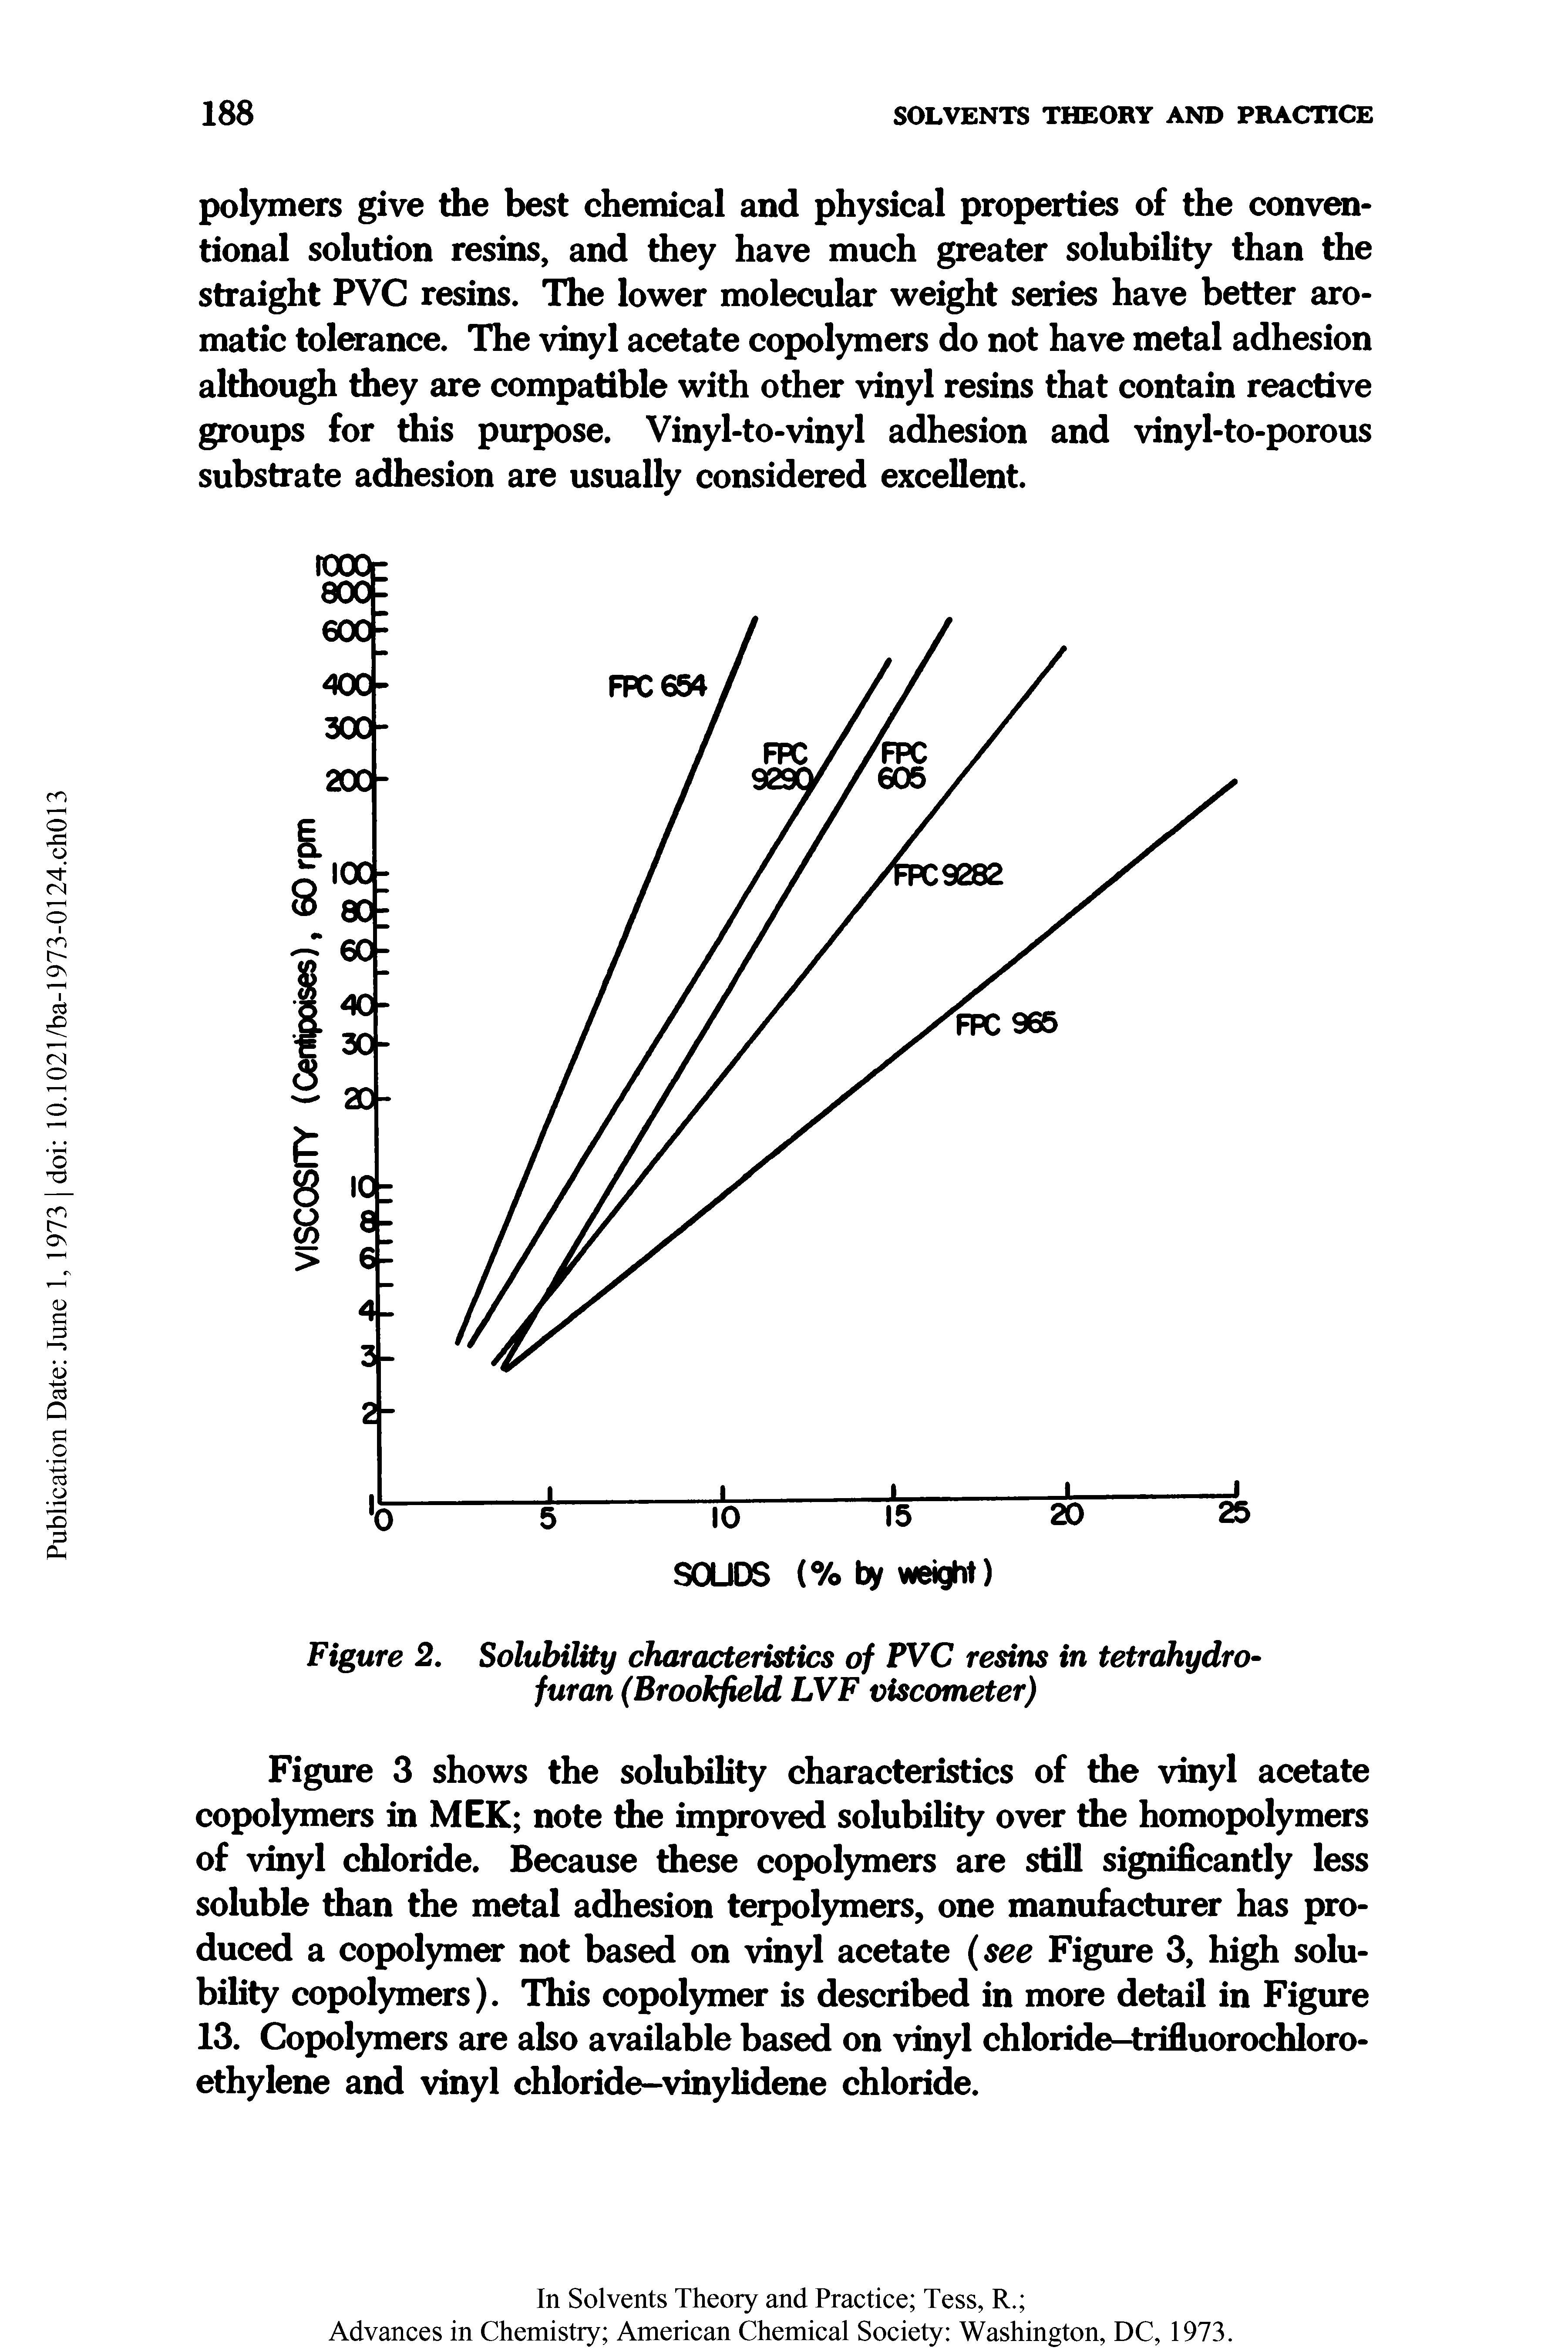 Figure 3 shows the solubility characteristics of the vinyl acetate copolymers in MEK note the improved solubility over the homopolymers of vinyl chloride. Because these copolymers are still significantly less soluble than the metal adhesion terpolymers, one manufacturer has produced a copolymer not based on vinyl acetate (see Figure 3, high solubility copolymers). This copolymer is described in more detail in Figure 13. Copolymers are also available based on vinyl chloride-trifluorochloro-ethylene and vinyl chloride-vinylidene chloride.